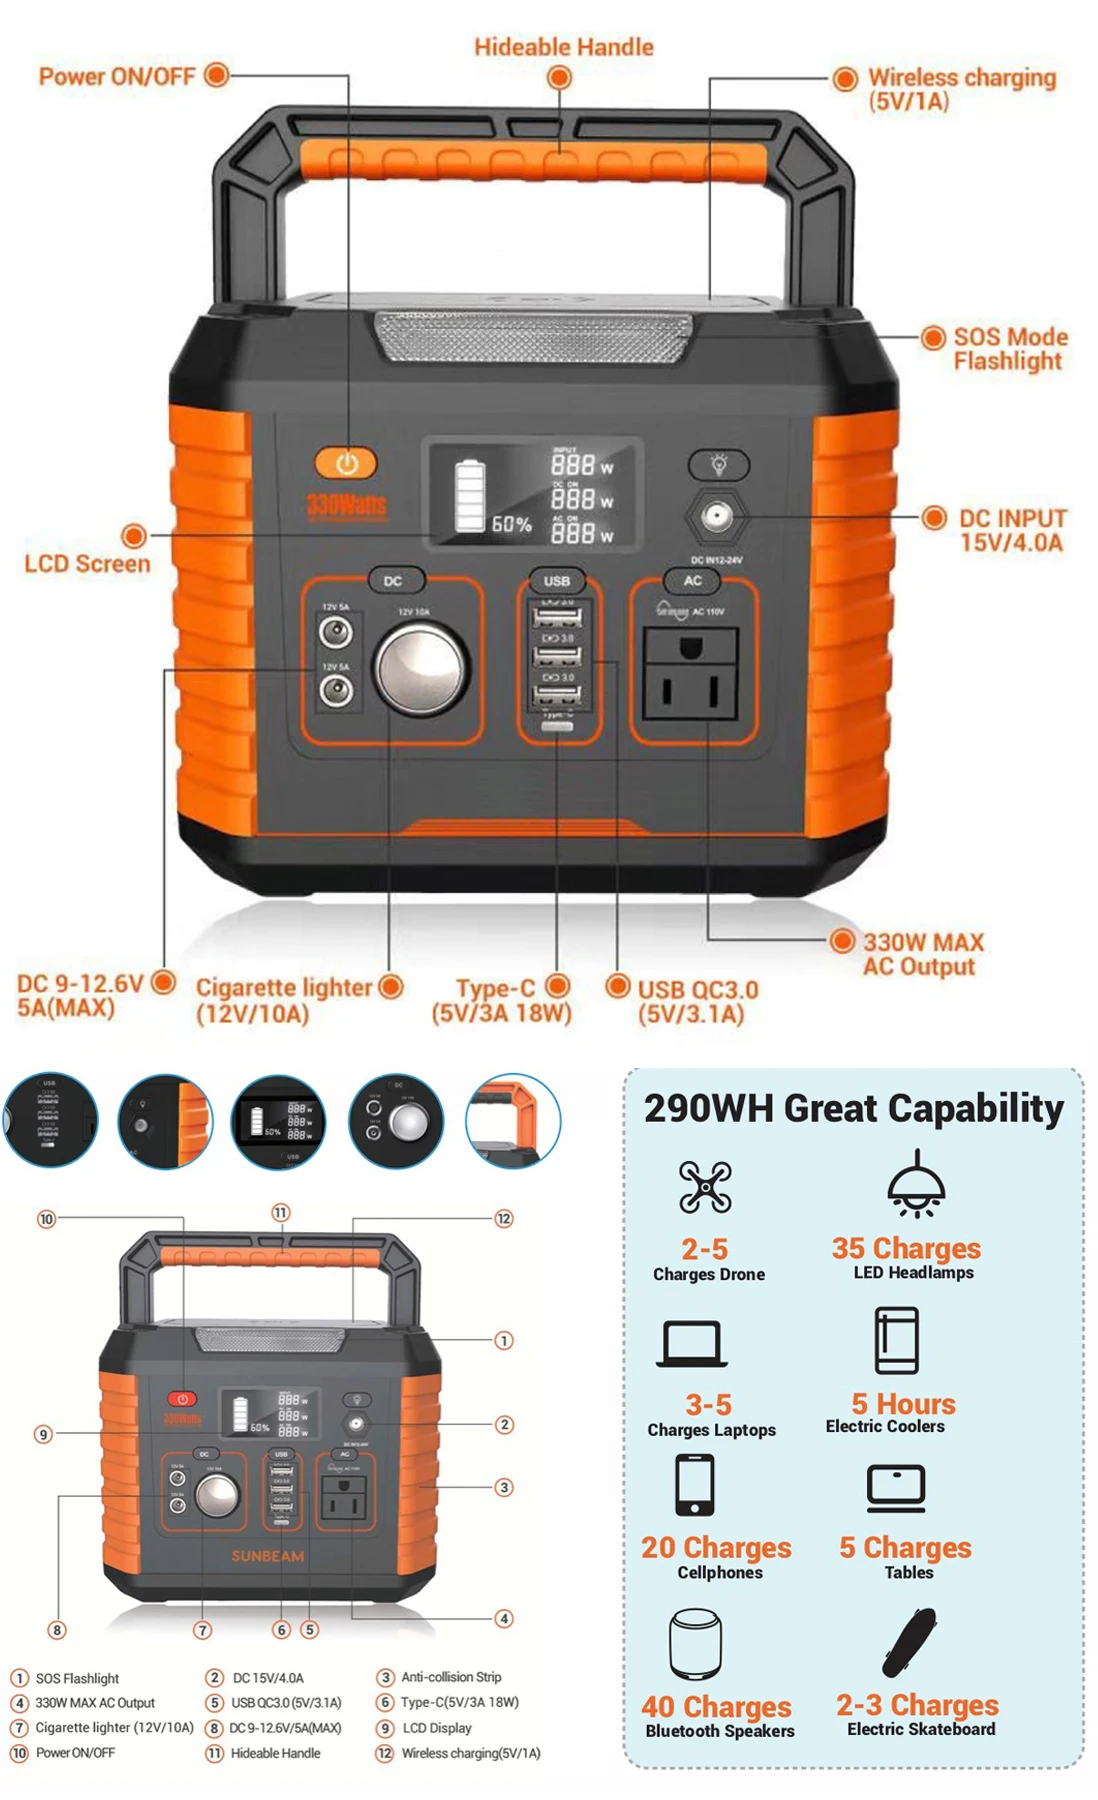 With Panels Packs Powerbank Power System 300watt Generator Portable For Solar Camping Outdoor